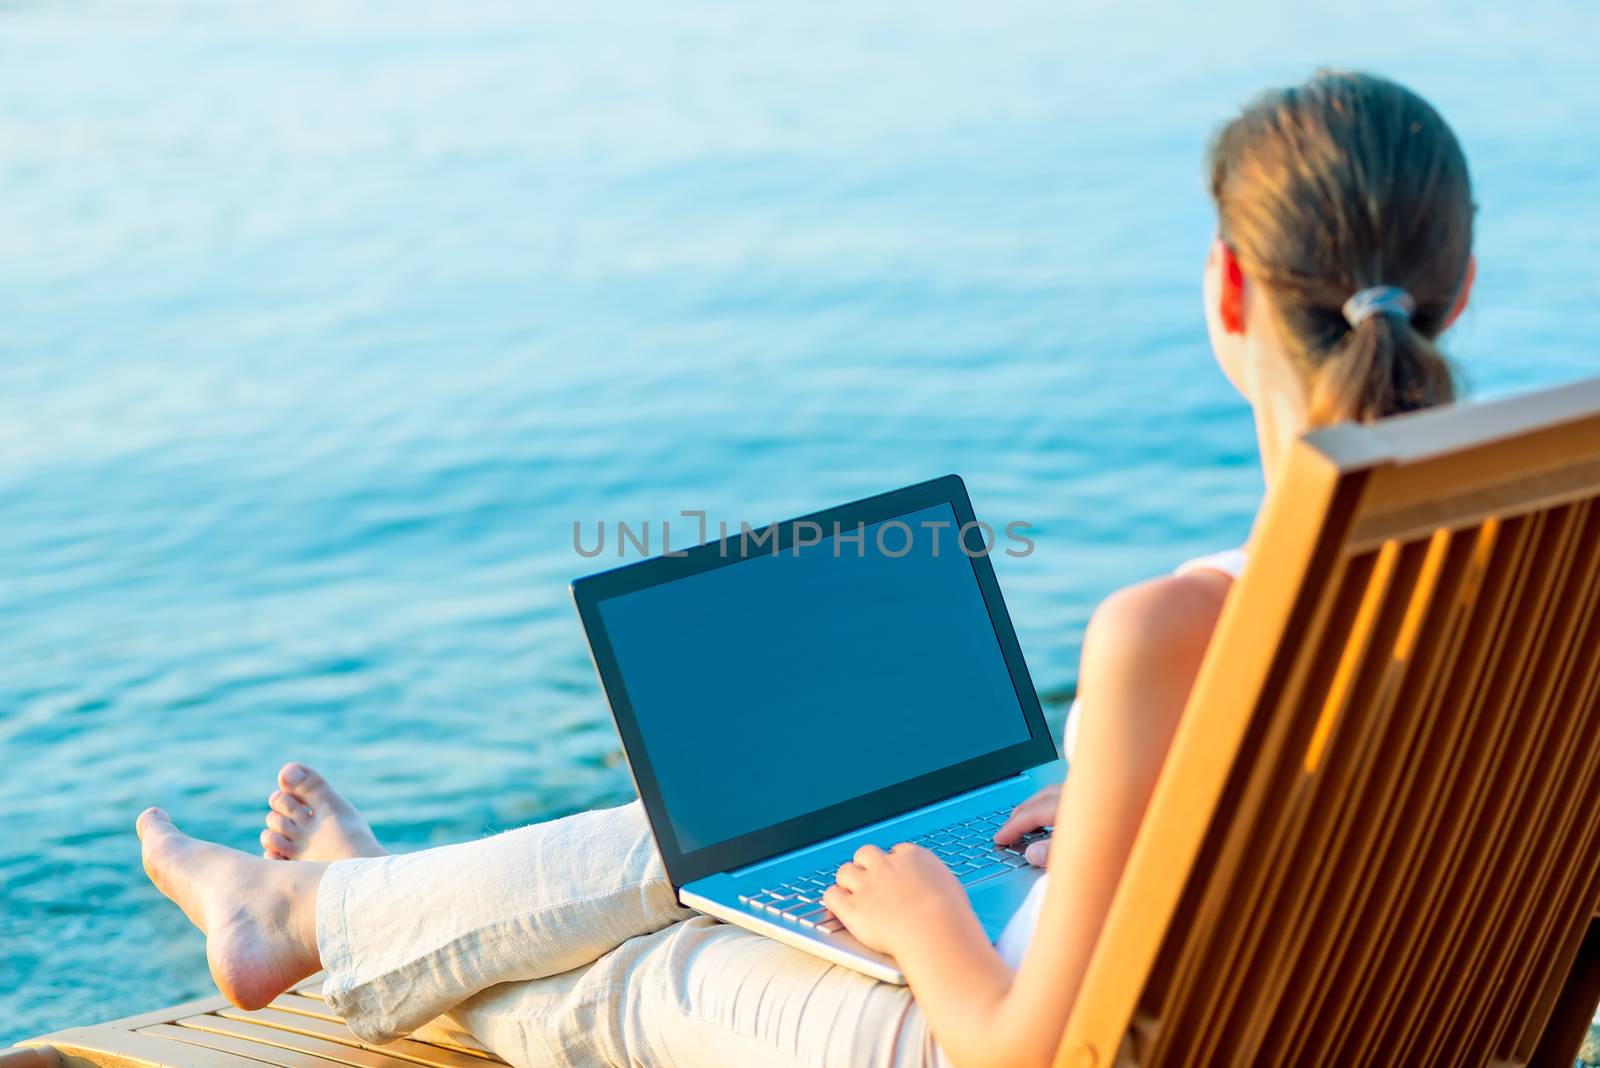 barefoot girl with a laptop on the beach working by kosmsos111